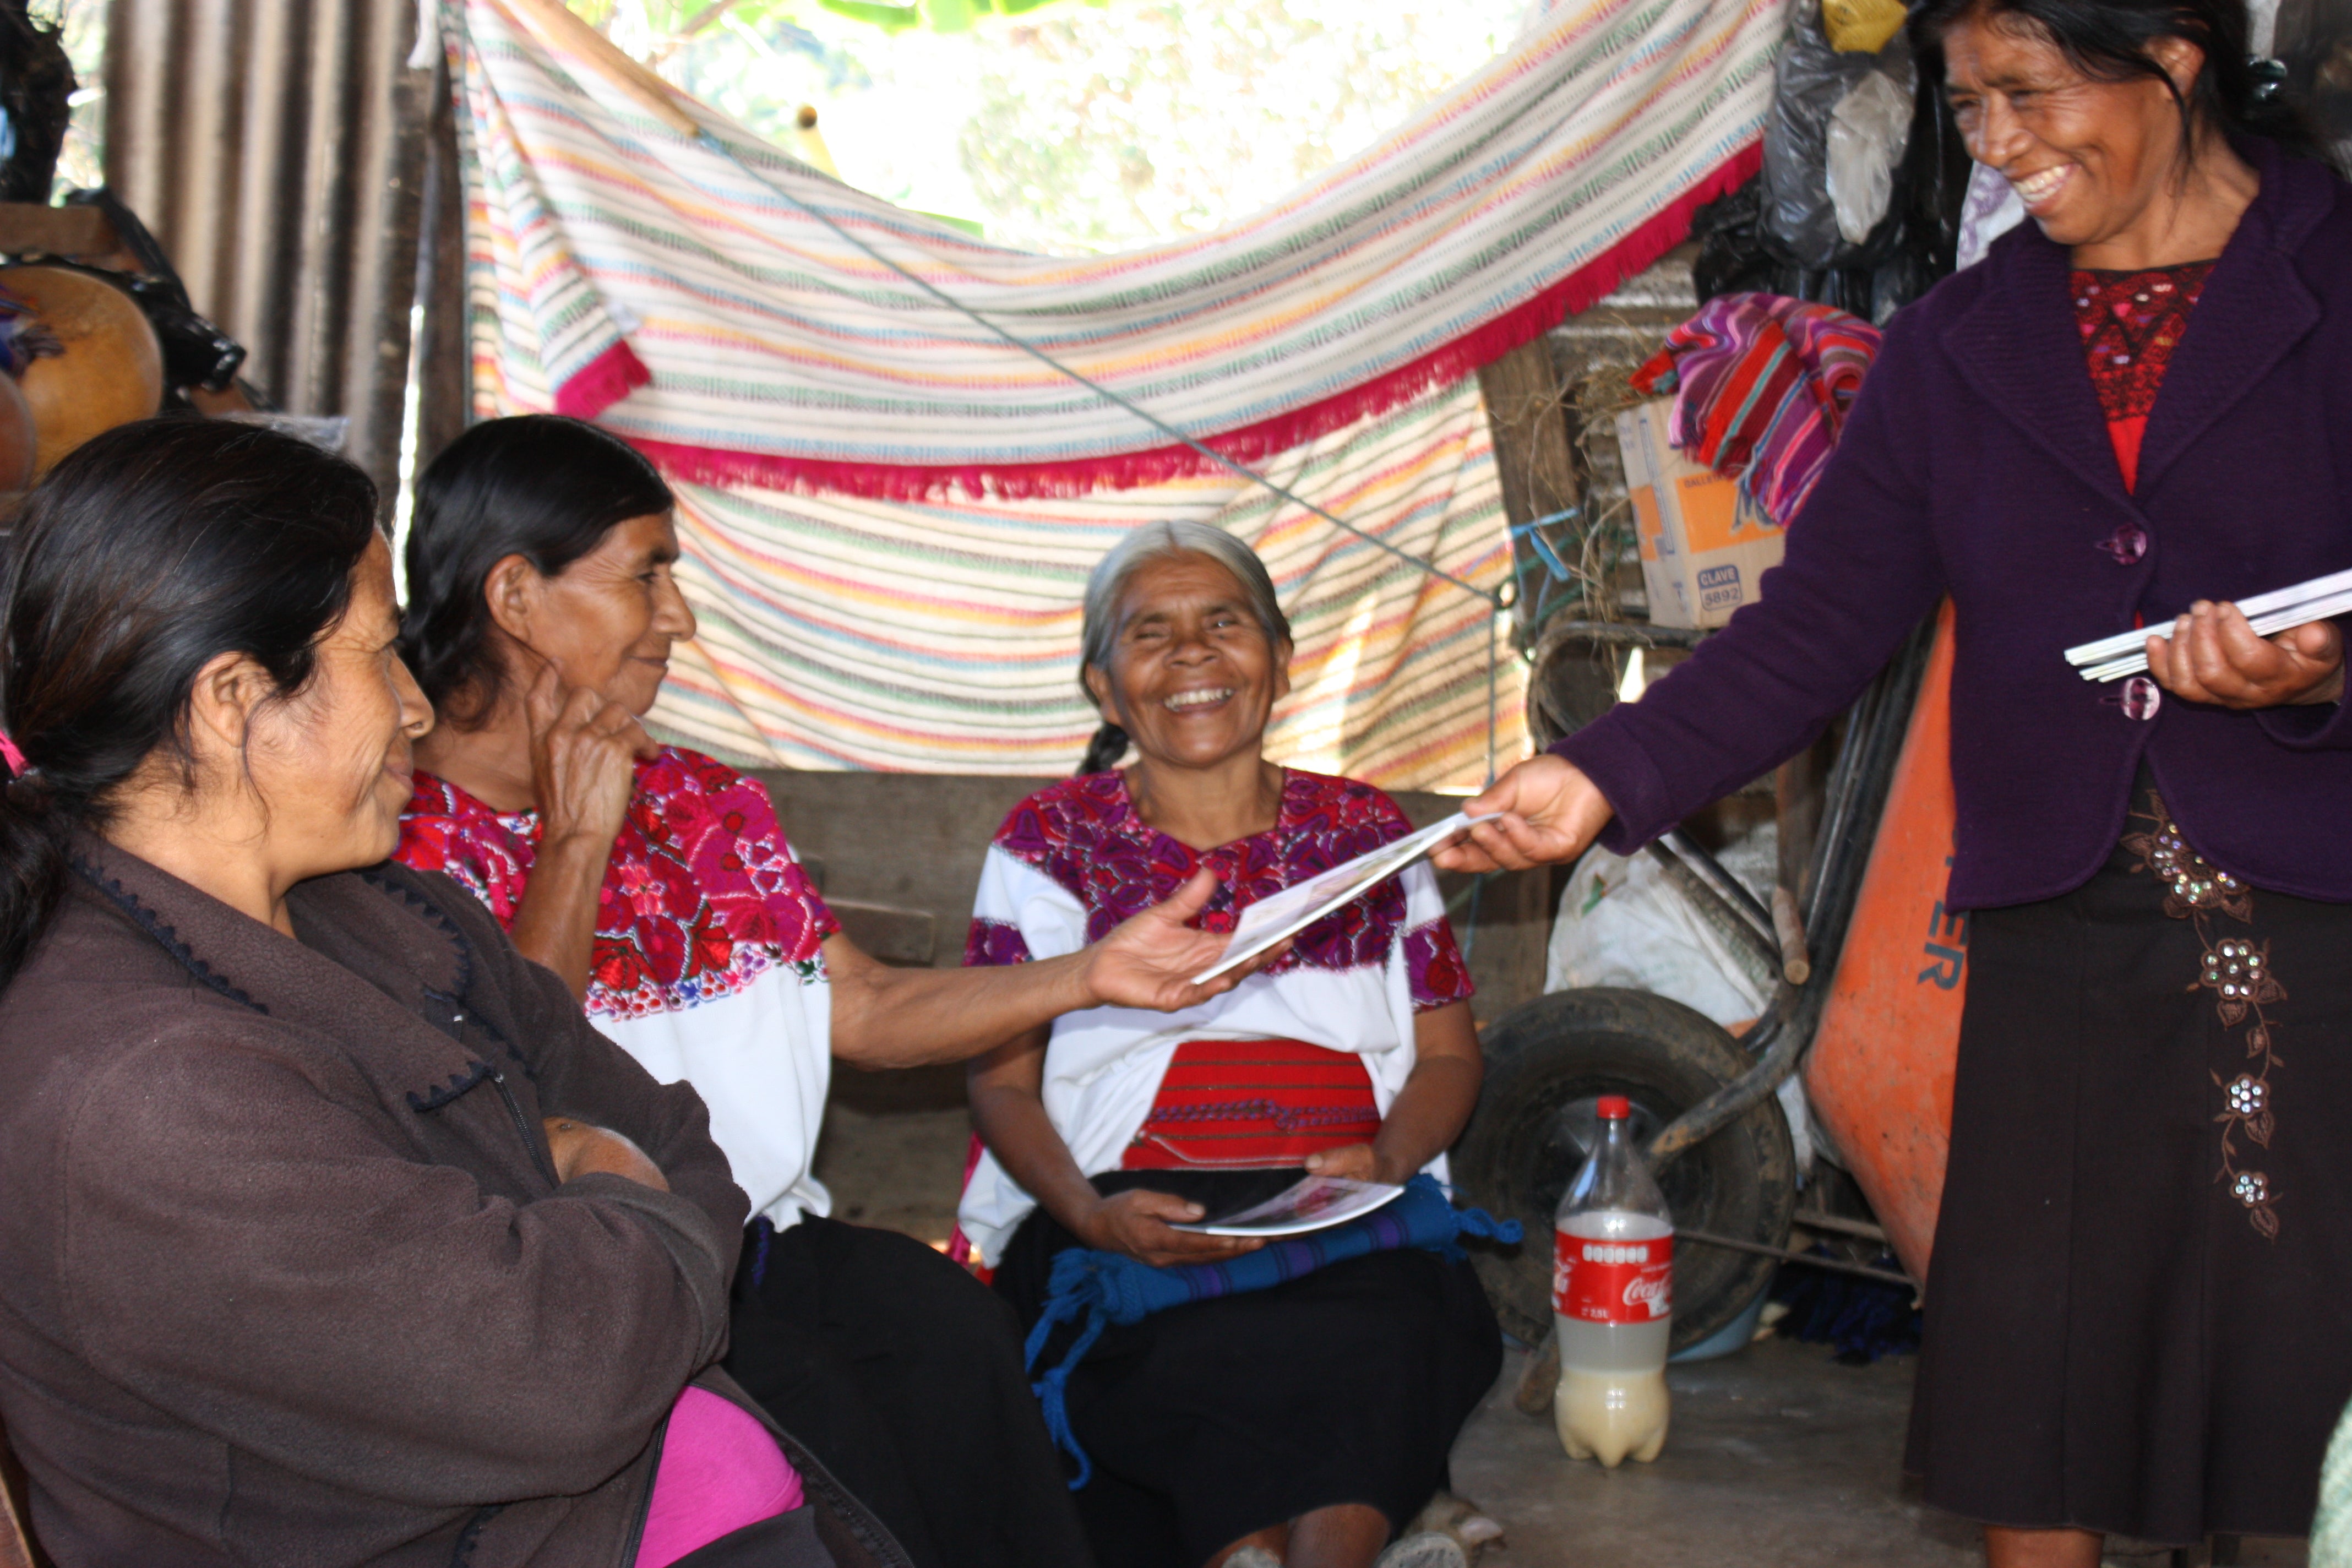 Traditional Mayan Midwives Caring for Women's Health